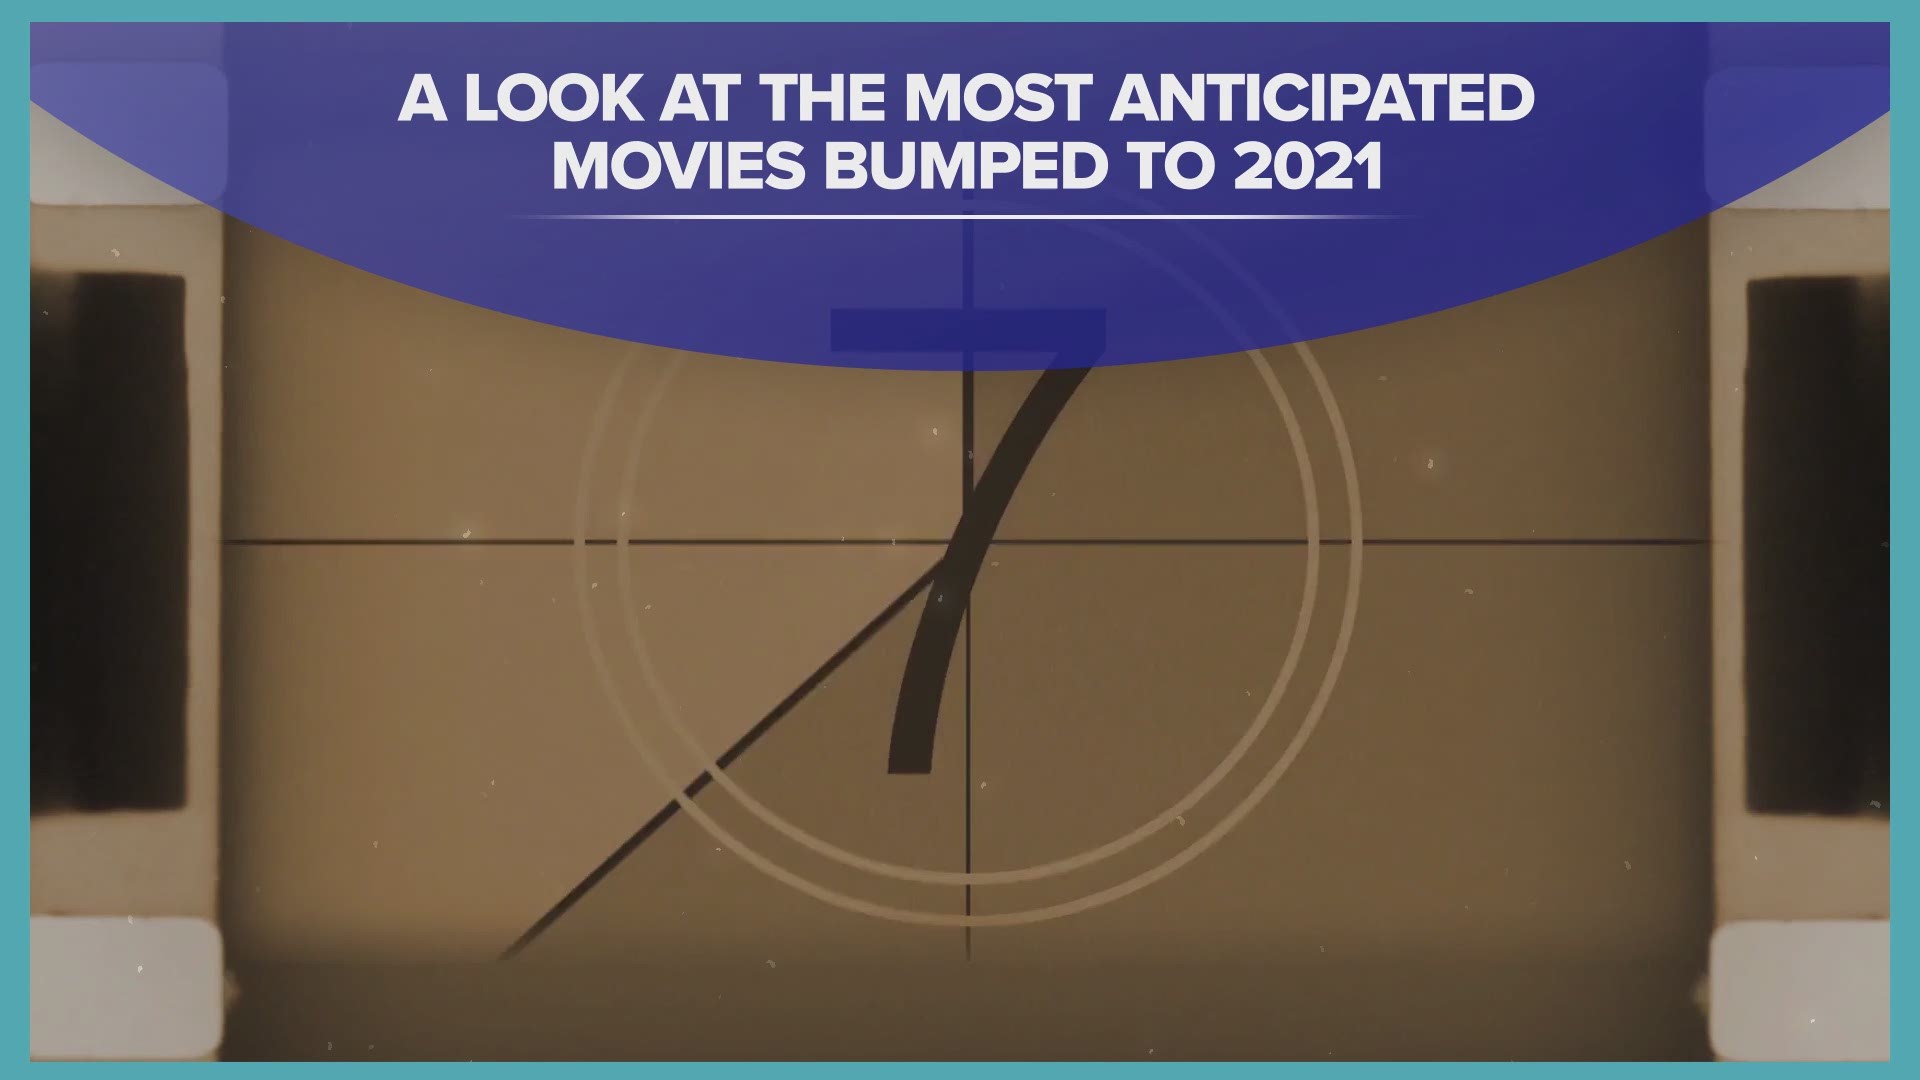 Movie studios this year had to shuffle the release dates for some of 2020's most anticipated films. Here's 14 movies pushed to 2021 we're most looking forward to.